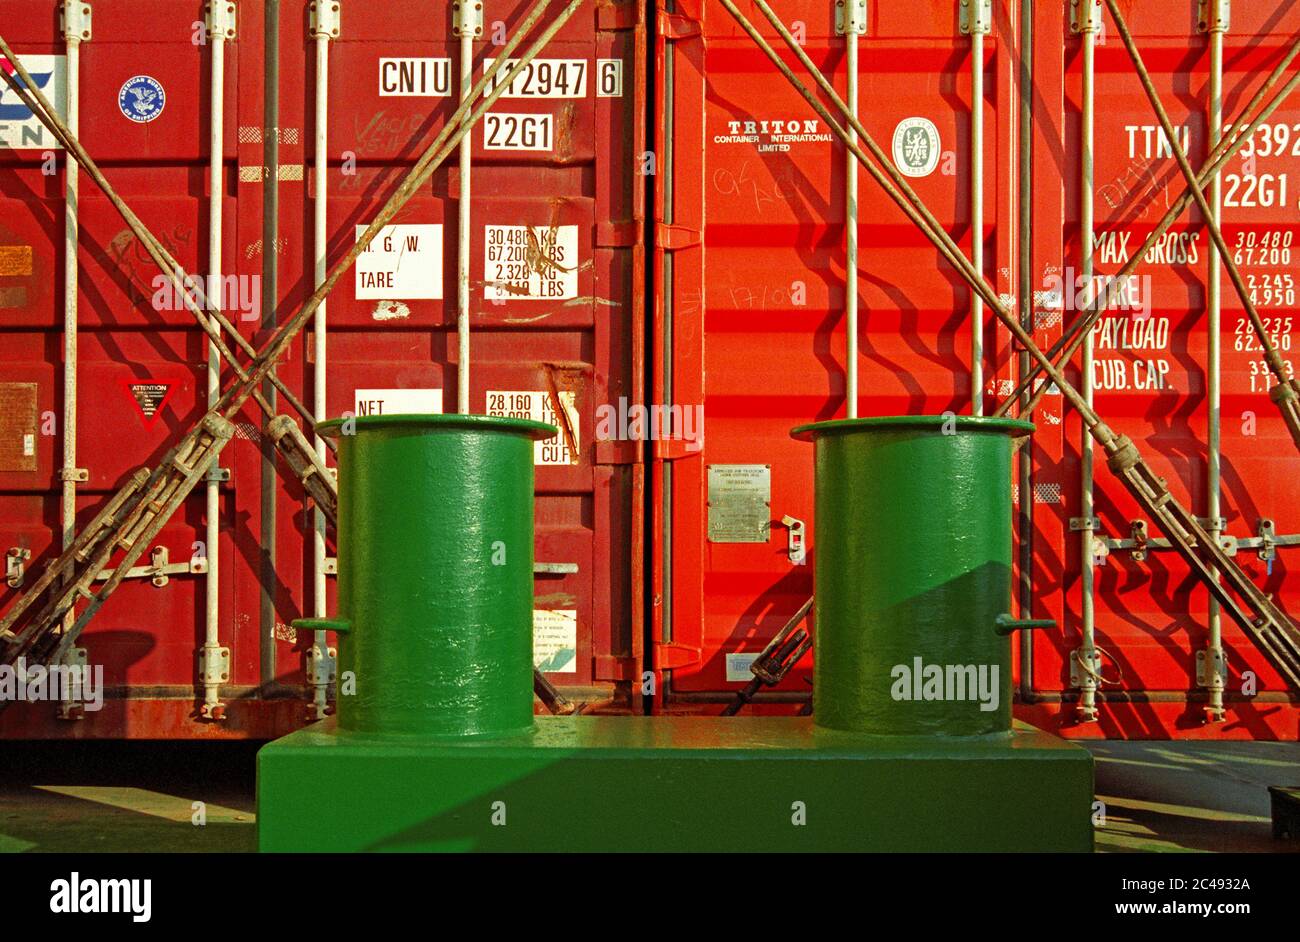 southamton, hampshire/united kingdom  - september 12, 2002: view onto containers stowed on deck and bollard of the container vessel  ccni chagres  (im Stock Photo